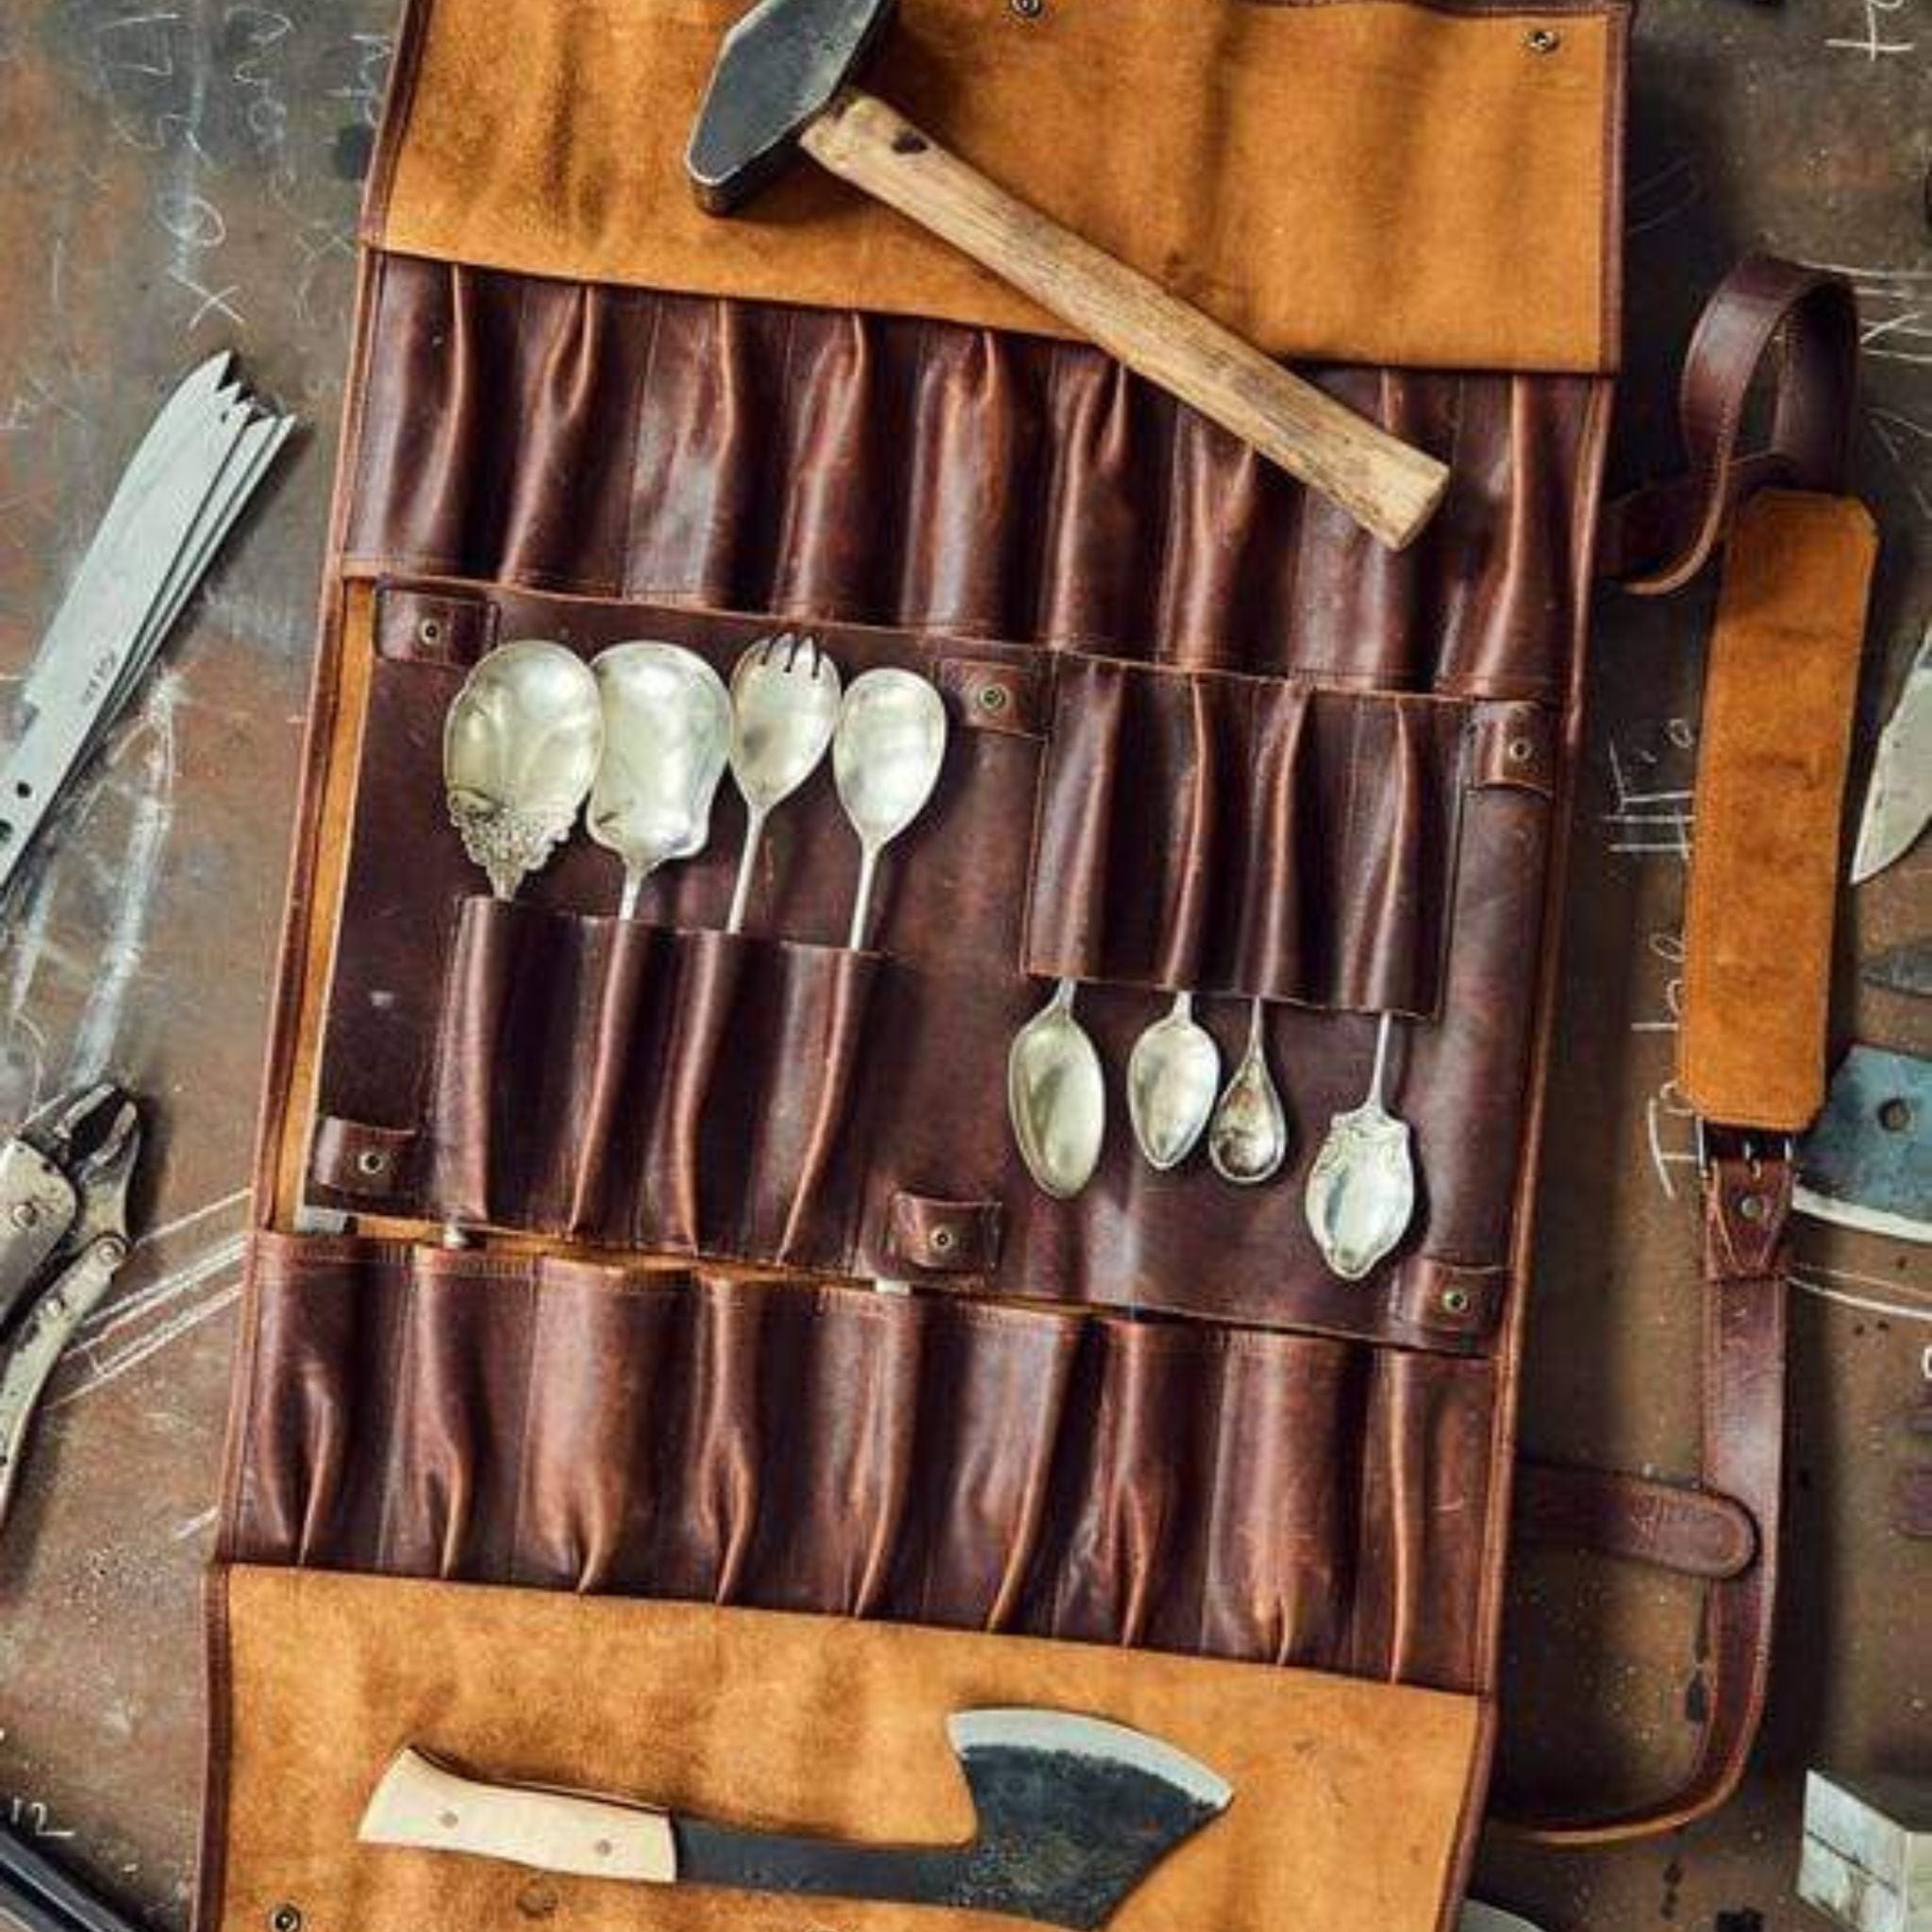 Leather Knife Roll Bag